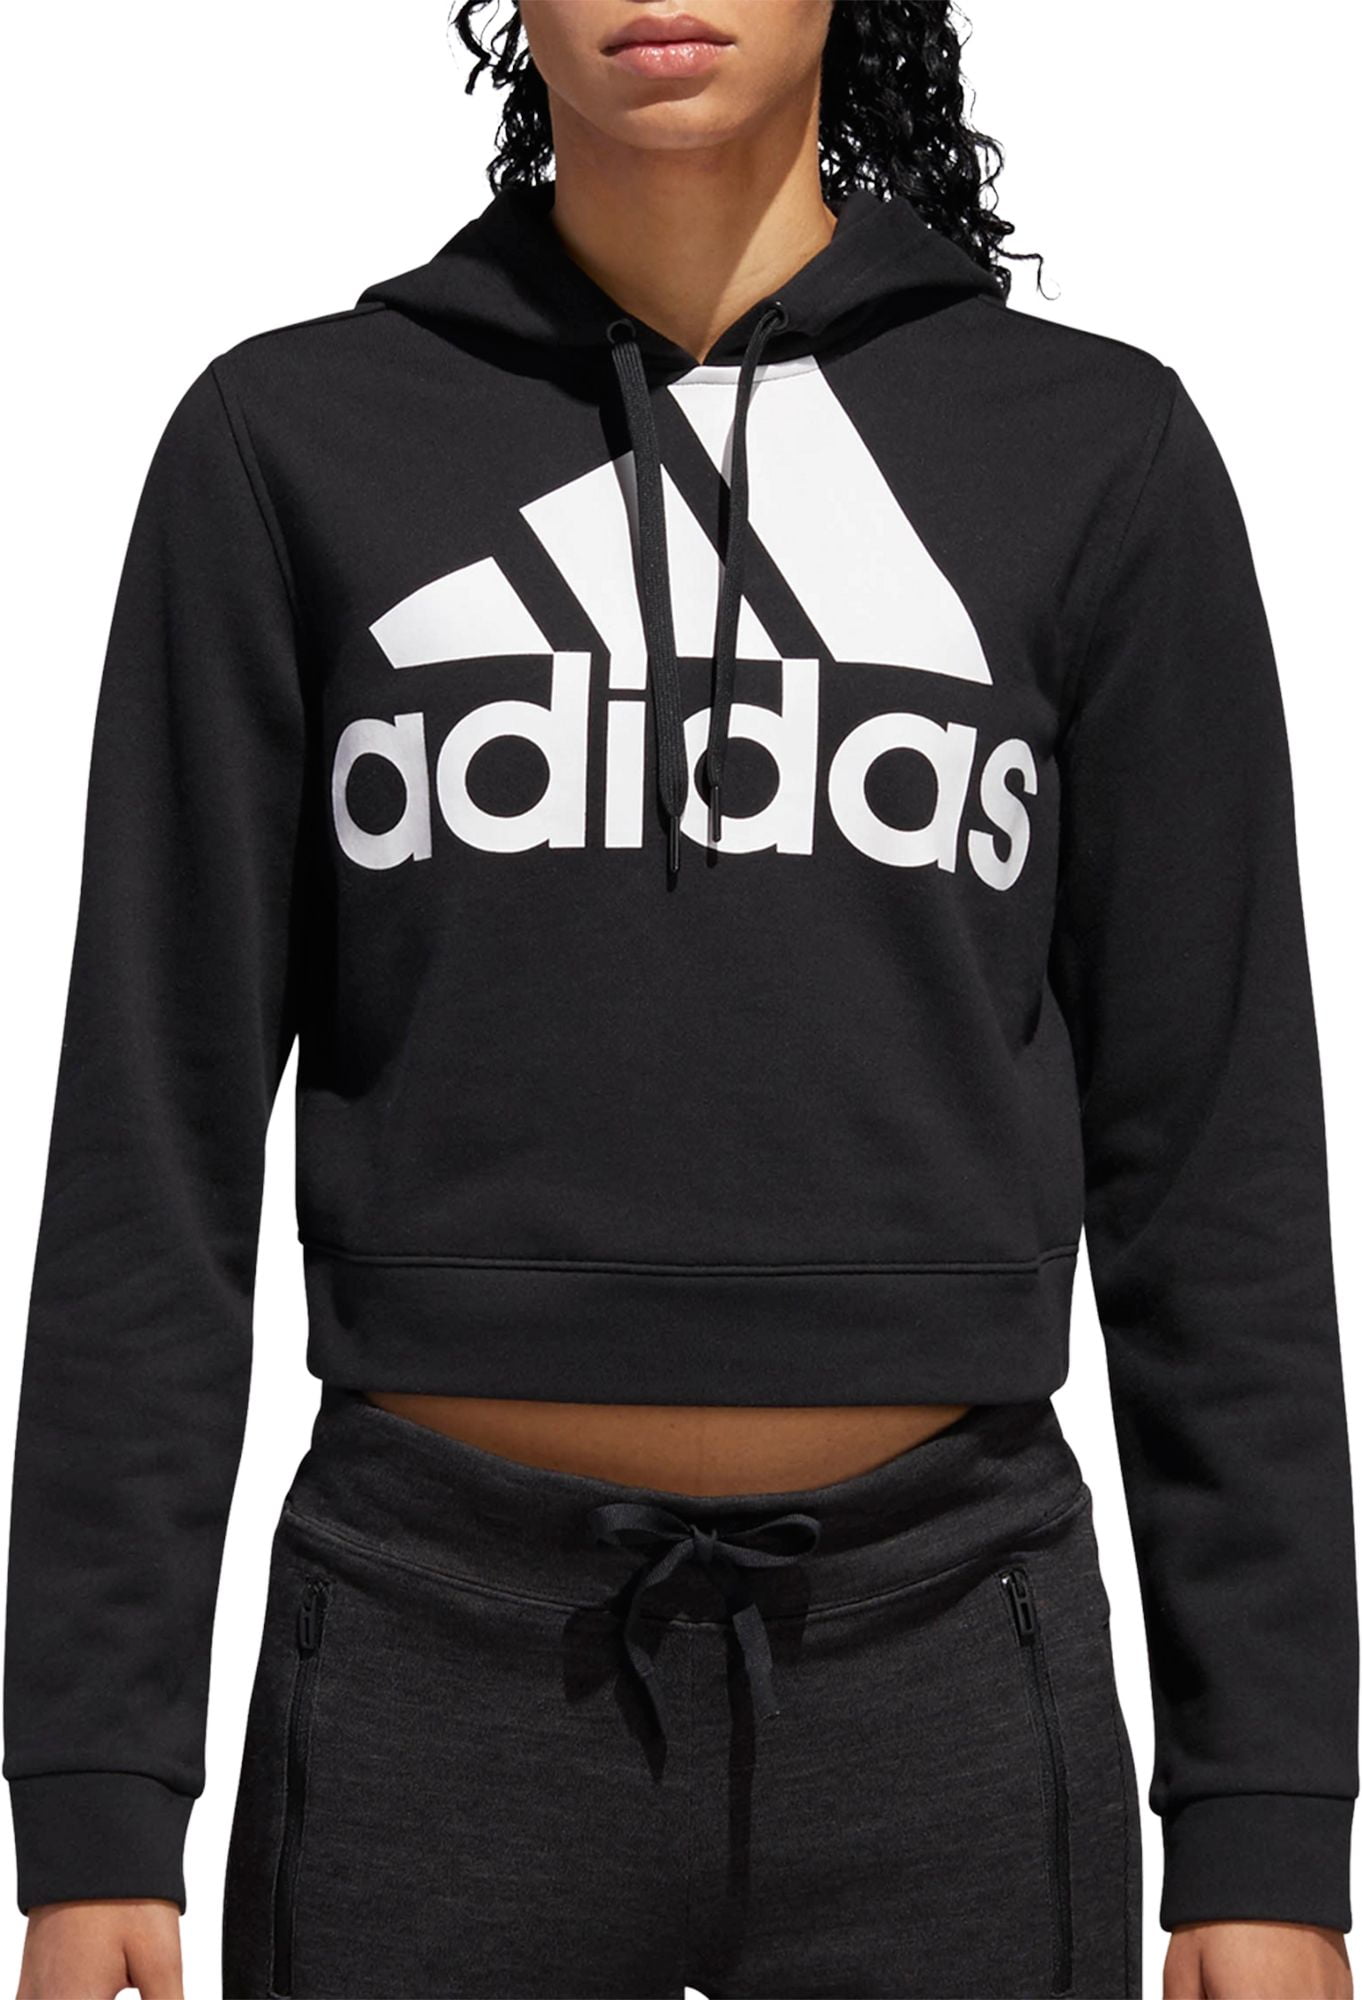 adidas women's cropped french terry hoodie